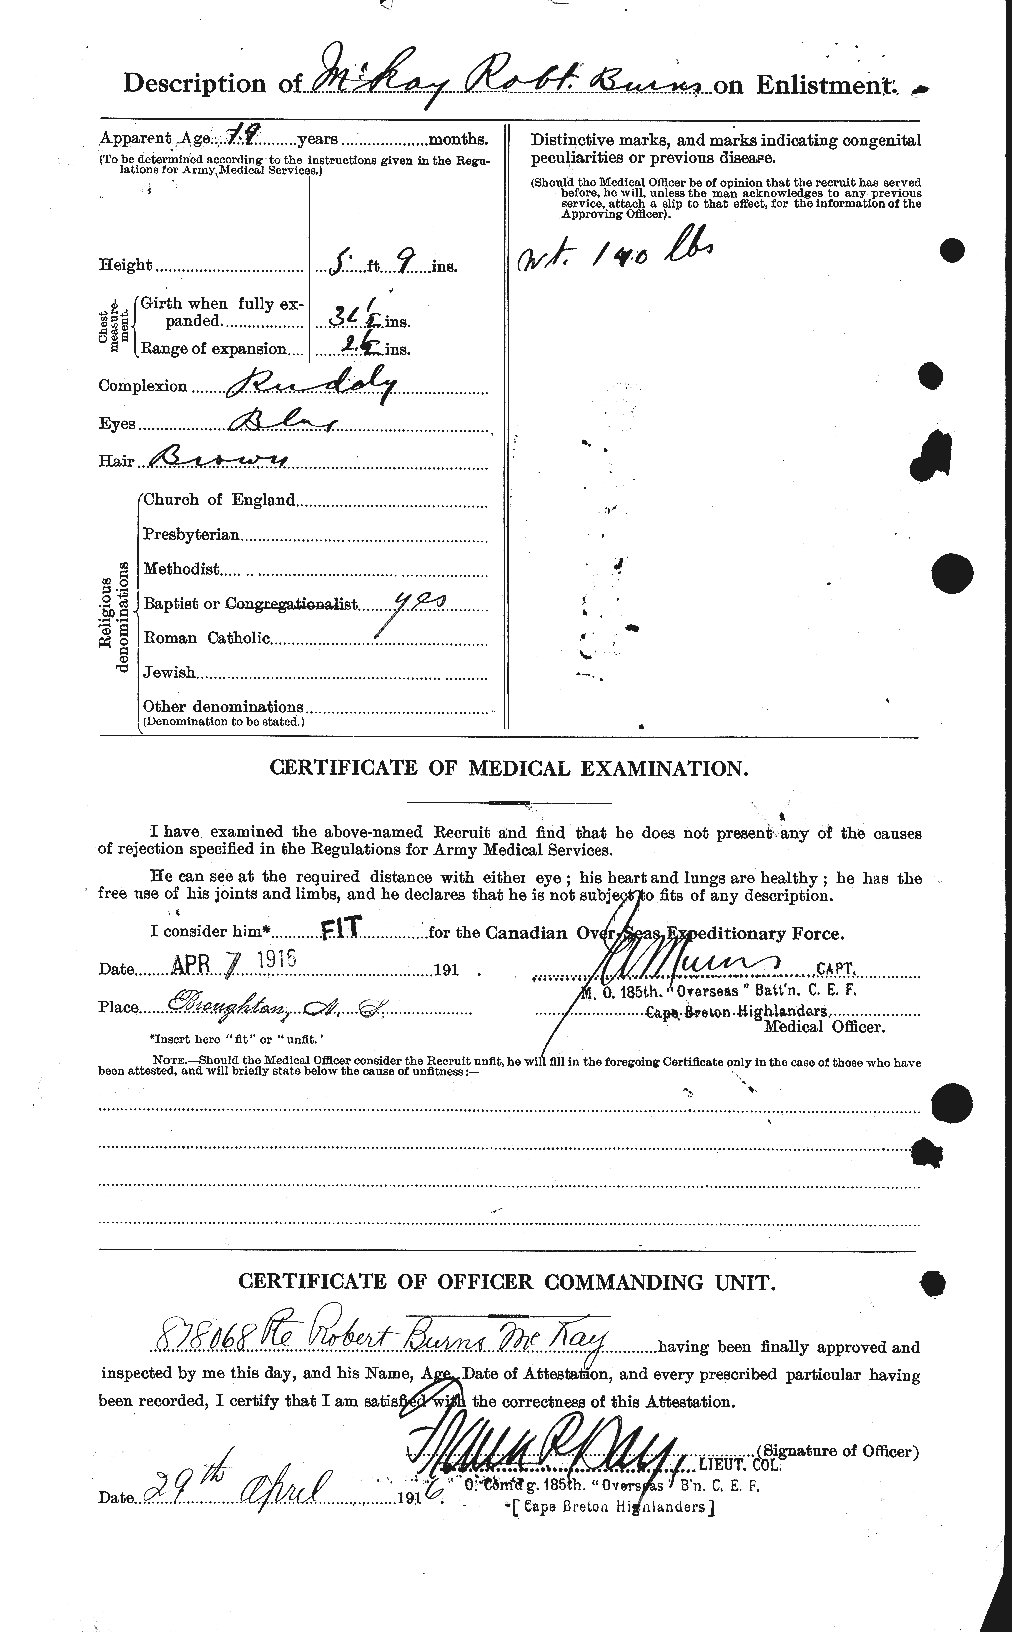 Personnel Records of the First World War - CEF 530087b